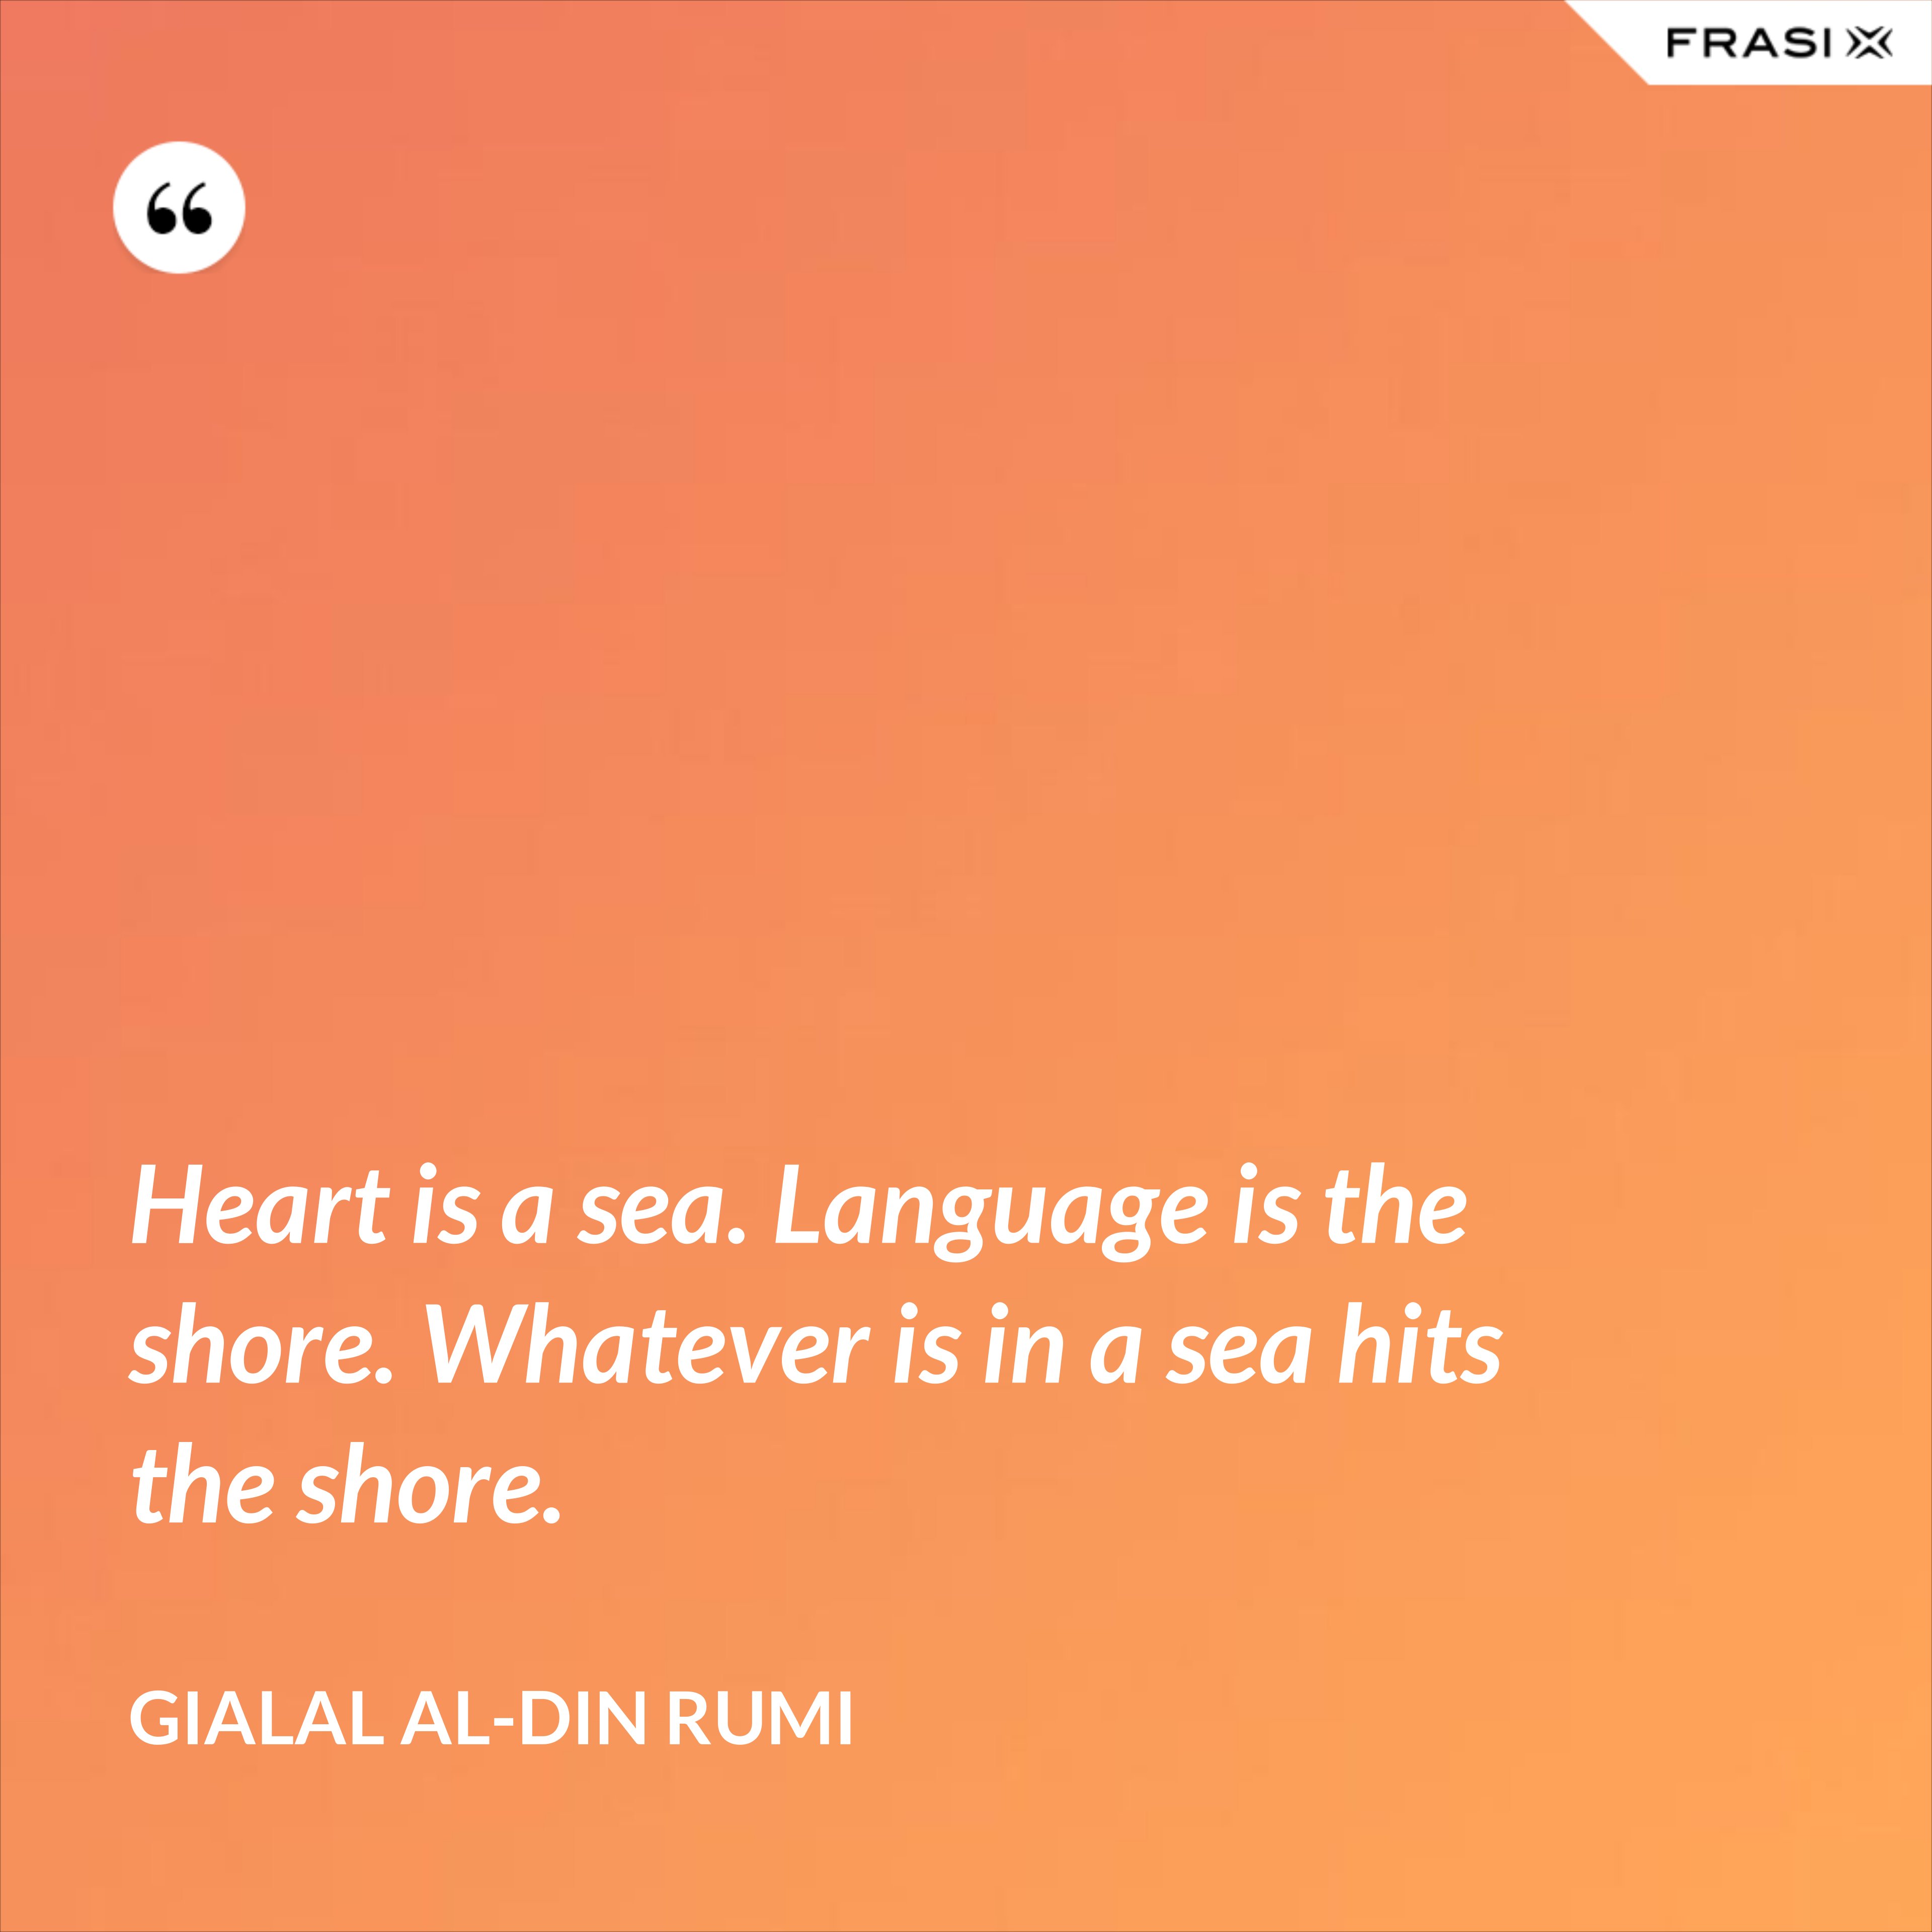 Heart is a sea. Language is the shore. Whatever is in a sea hits the shore. - Gialal al-Din Rumi